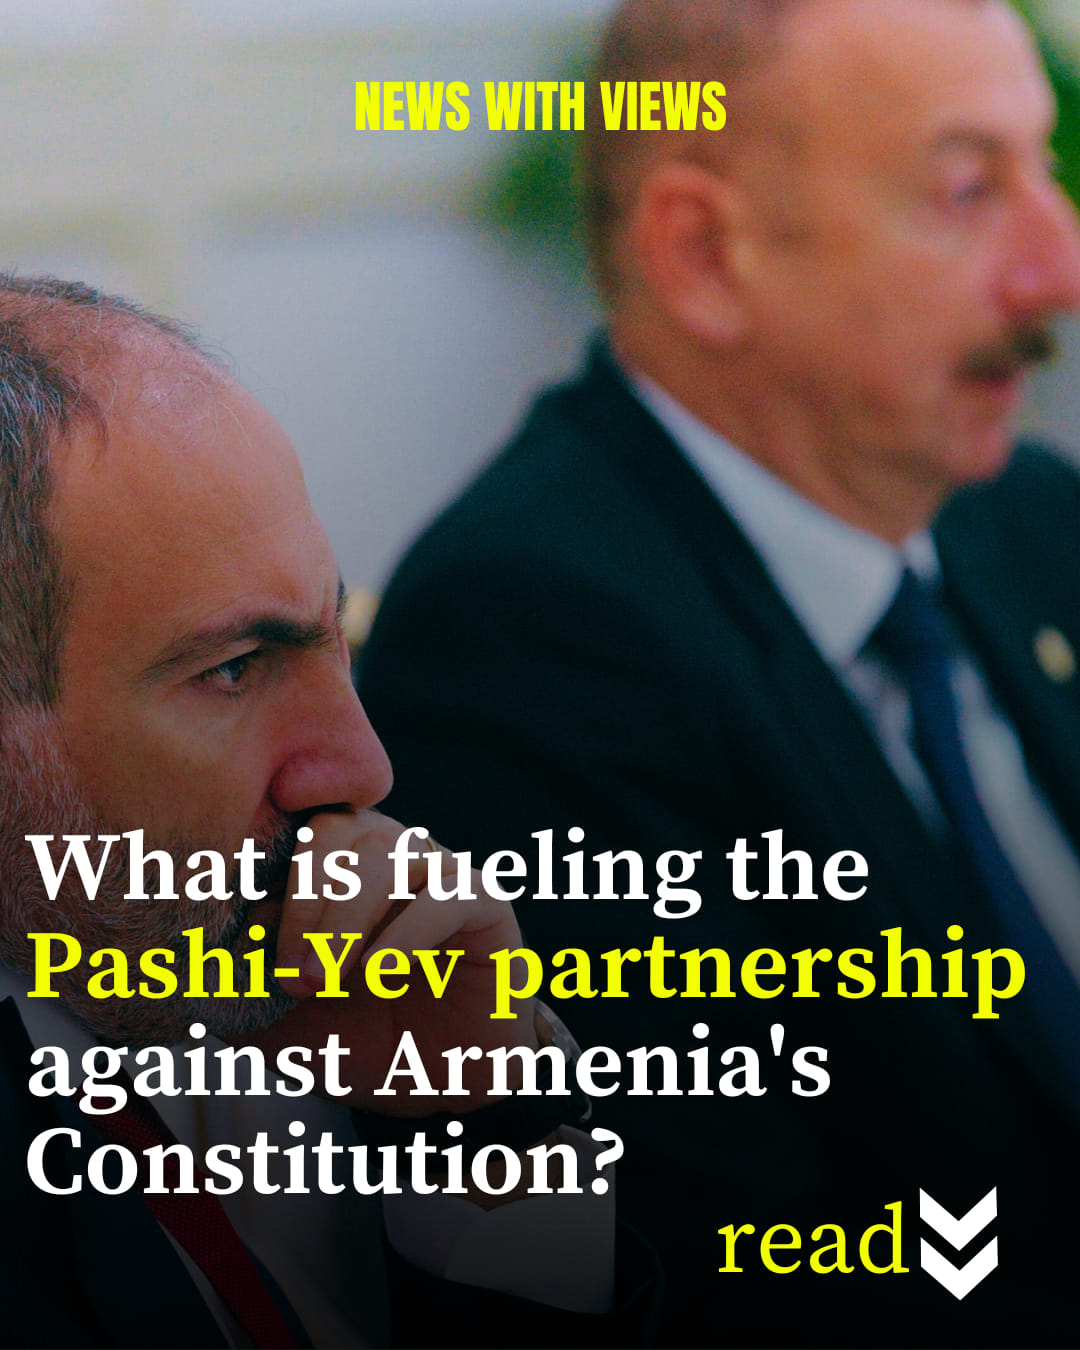 What is fueling the Pashi-Yev partnership against Armenia’s Constitution?